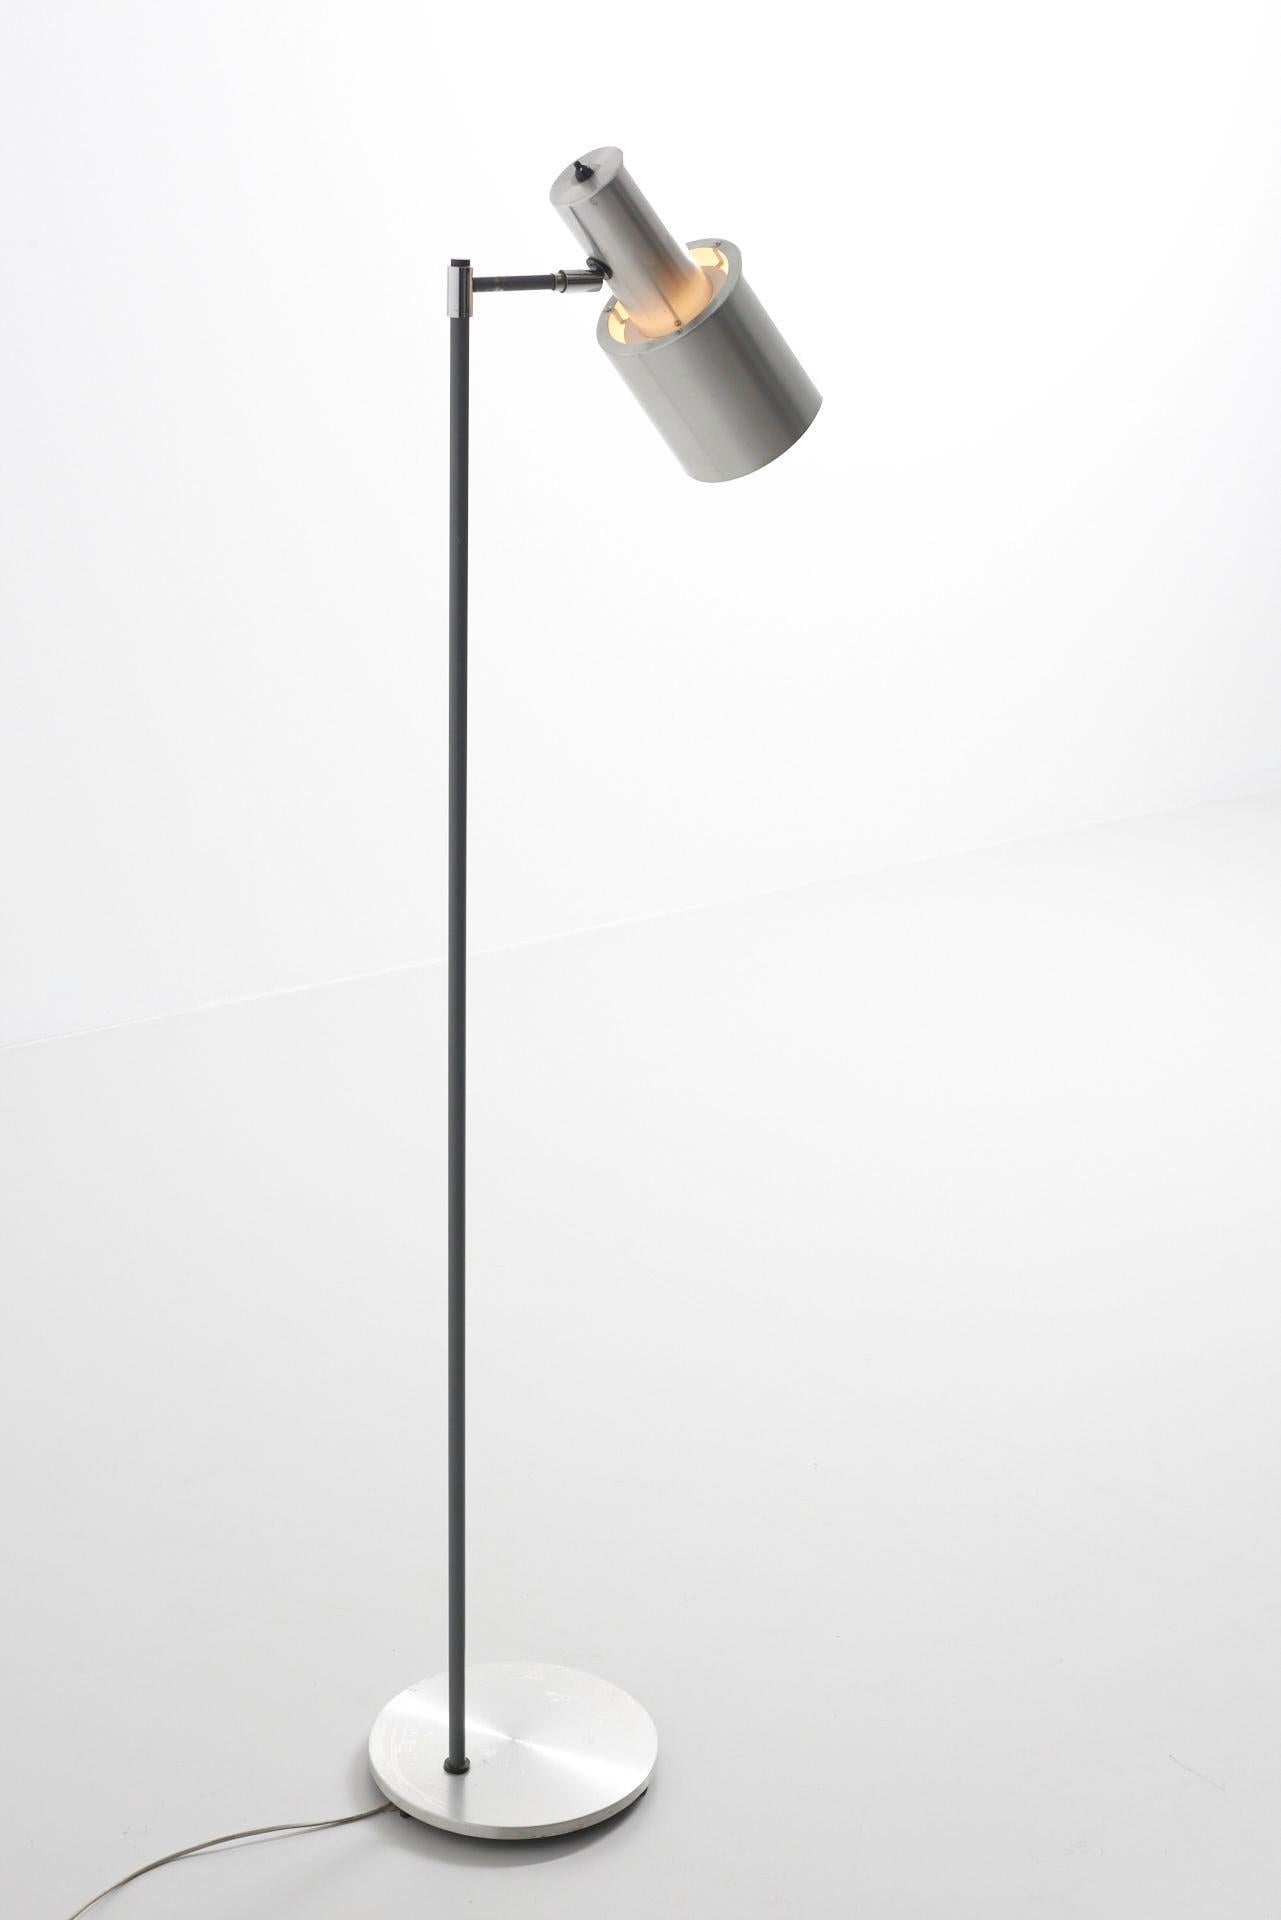 A floor lamp, model 'Studio'. Aluminium and grey lacquered steel. Design by Jo Hammerborg, produced by Fog & Mørup in Denmark. In working condition, with visible traces of wear.